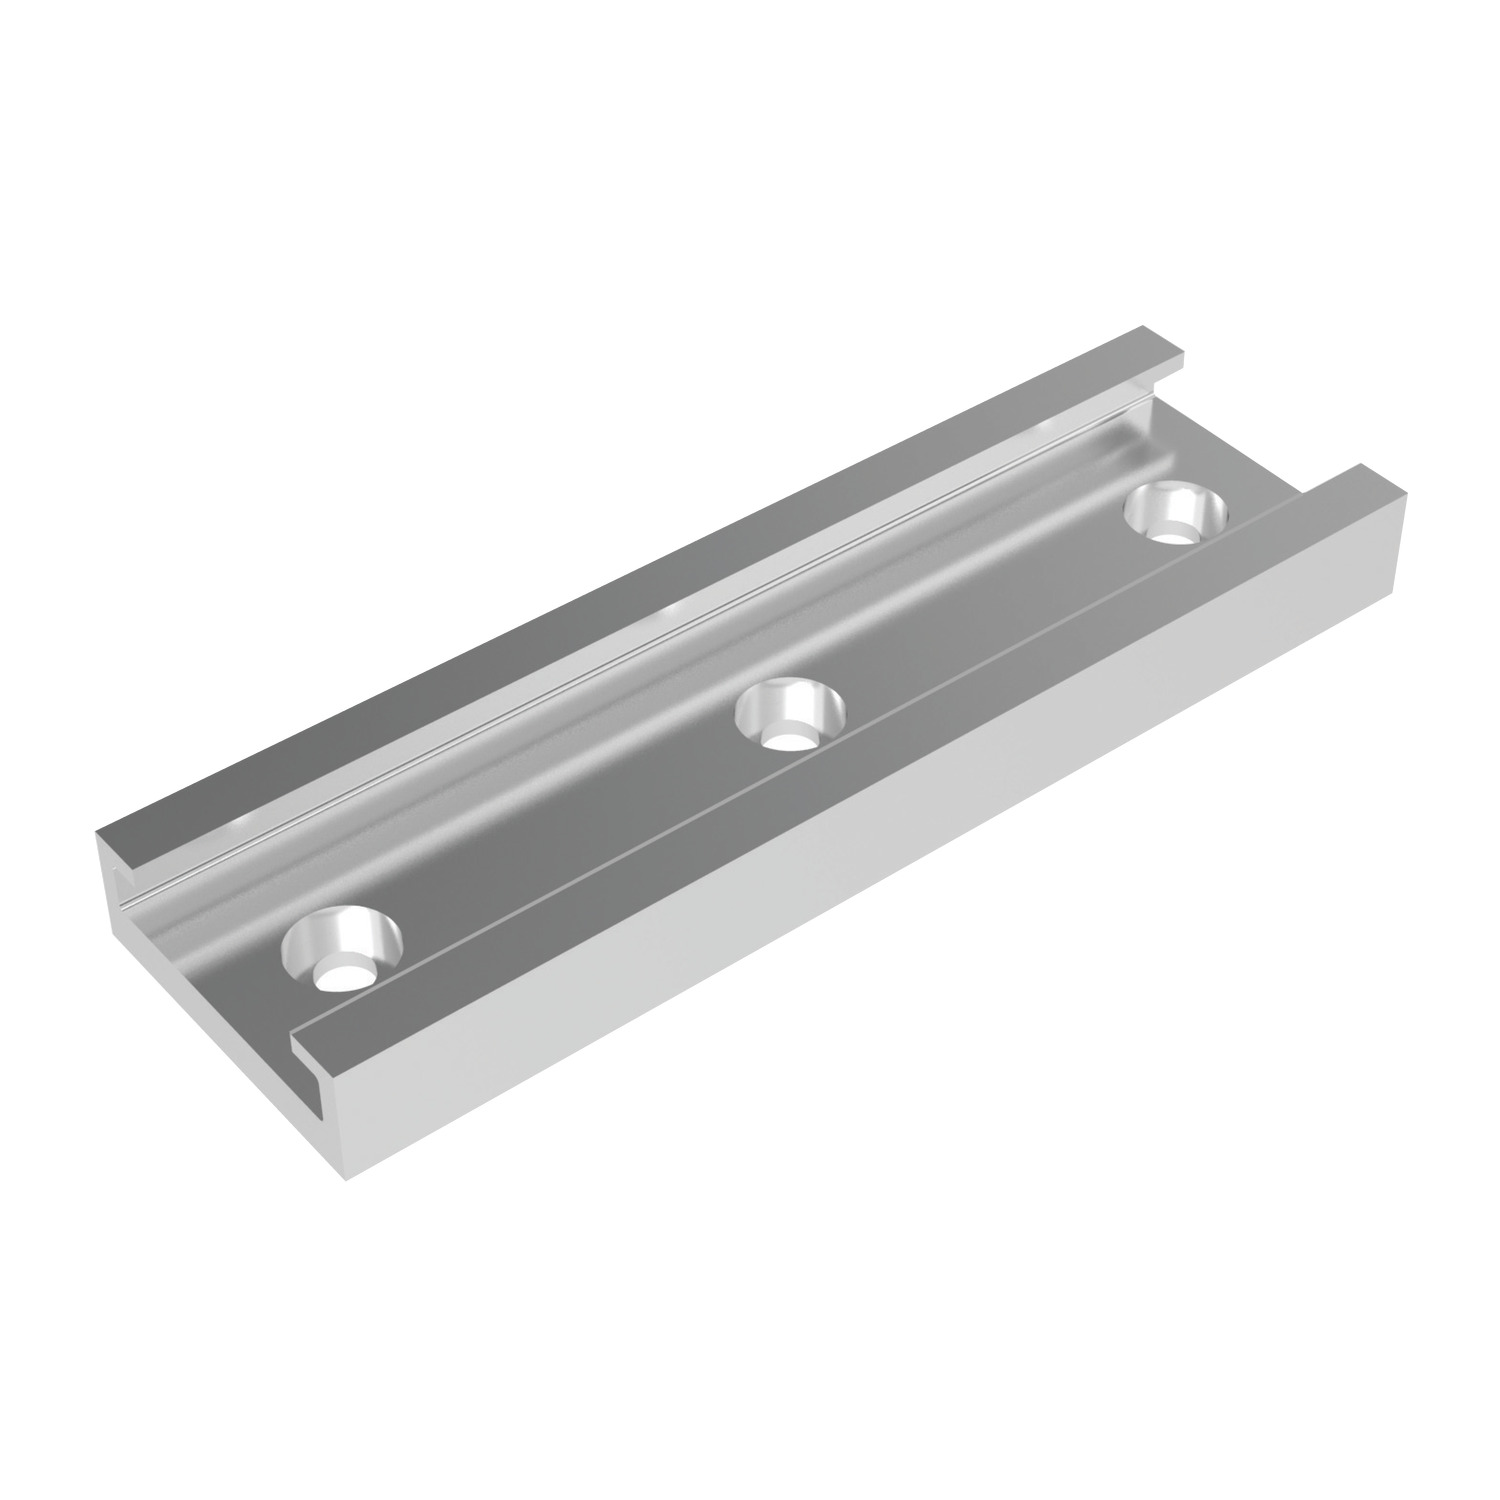 Mini Slide Rail Mini linear slide rails for use with our P0300 mini slide carriage. Made from anodized aluminium for excellent corrosion resistance.